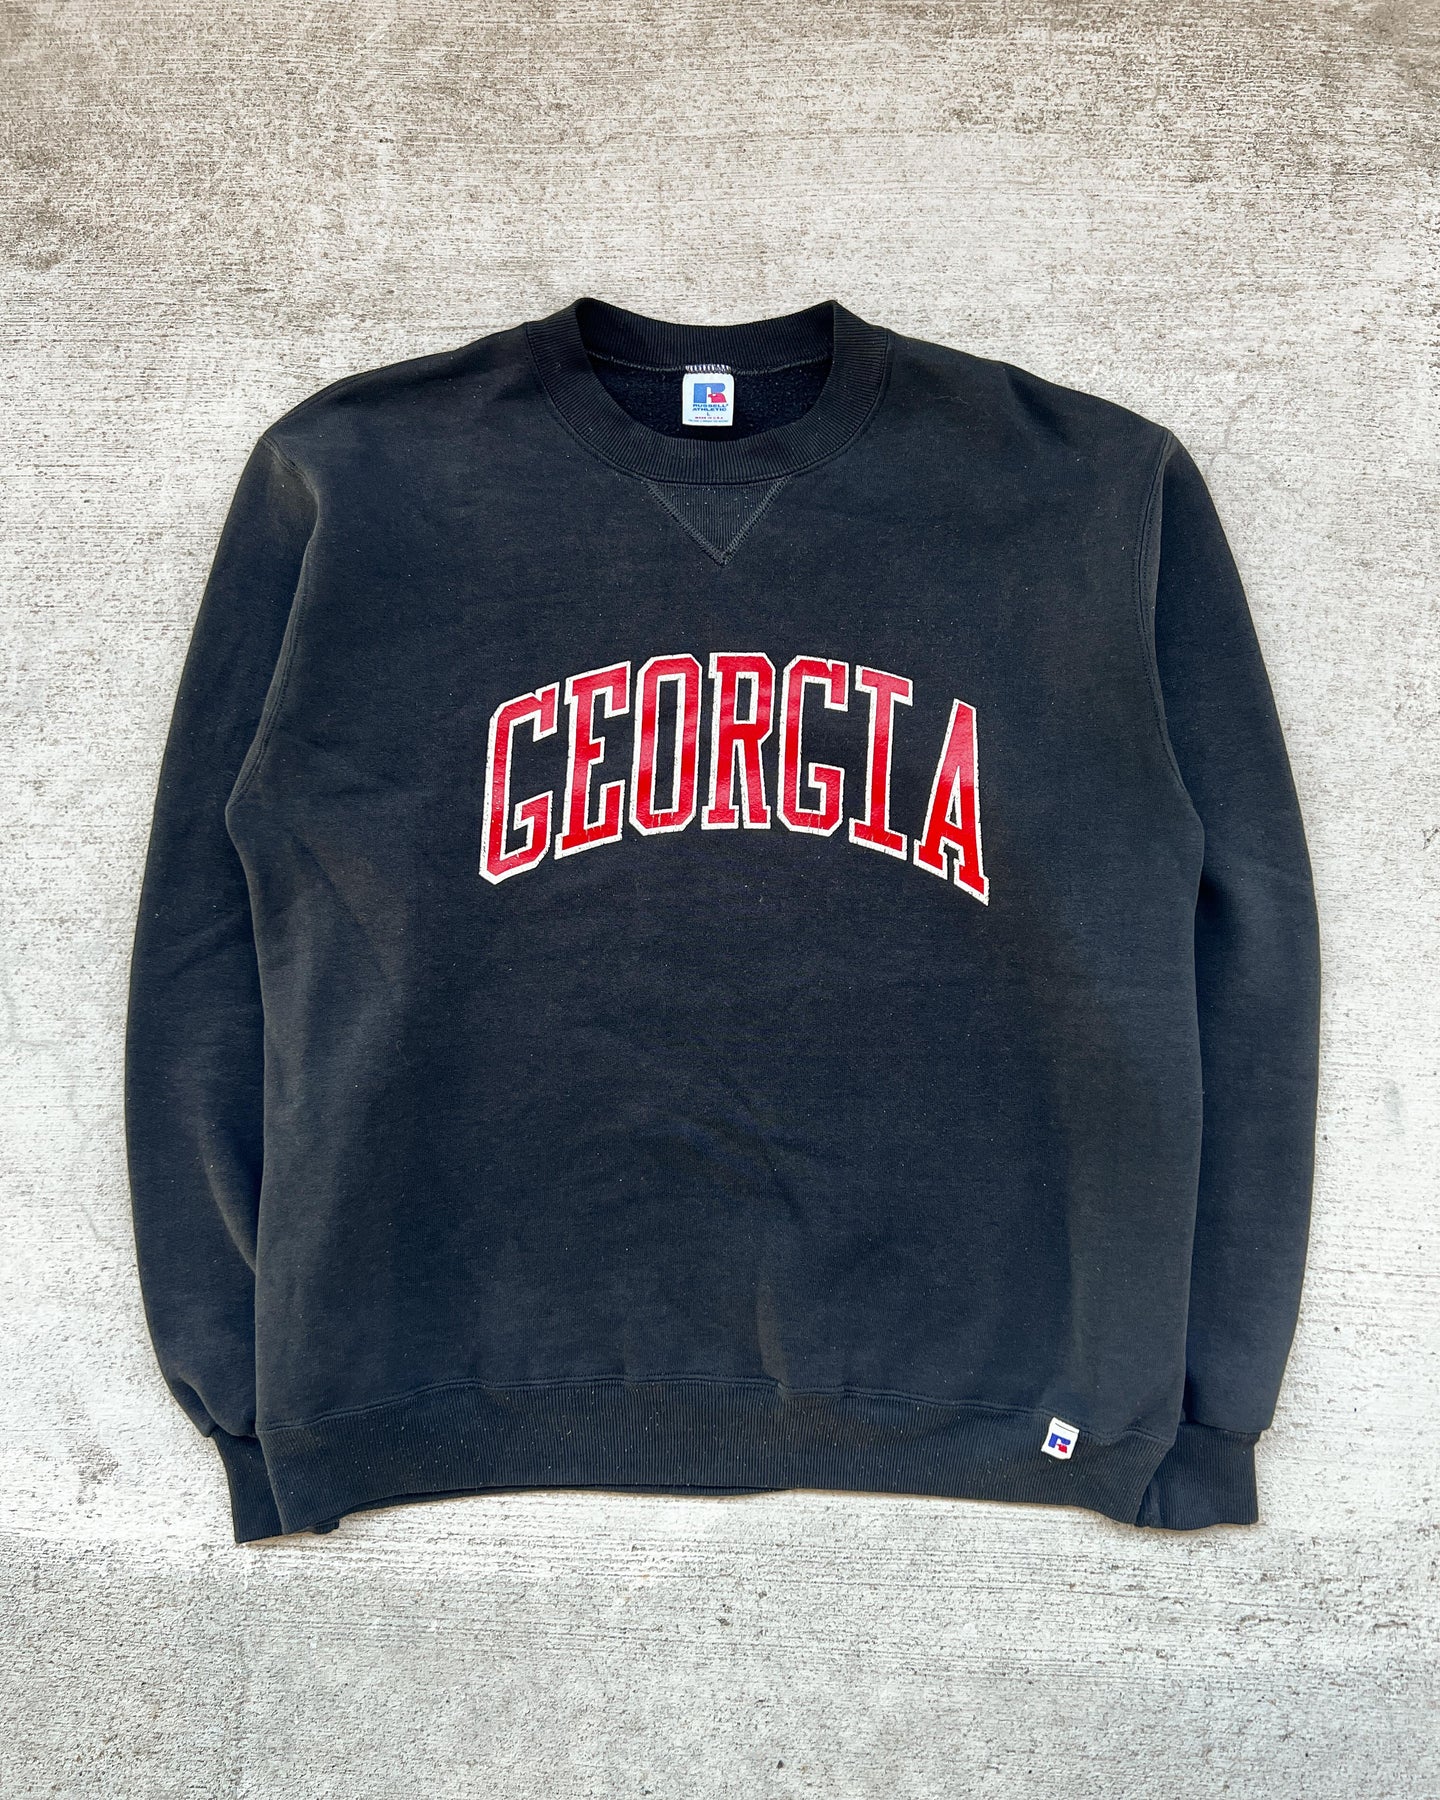 1980s Faded Black Russell Athletic Georgia Crewneck - Size Large